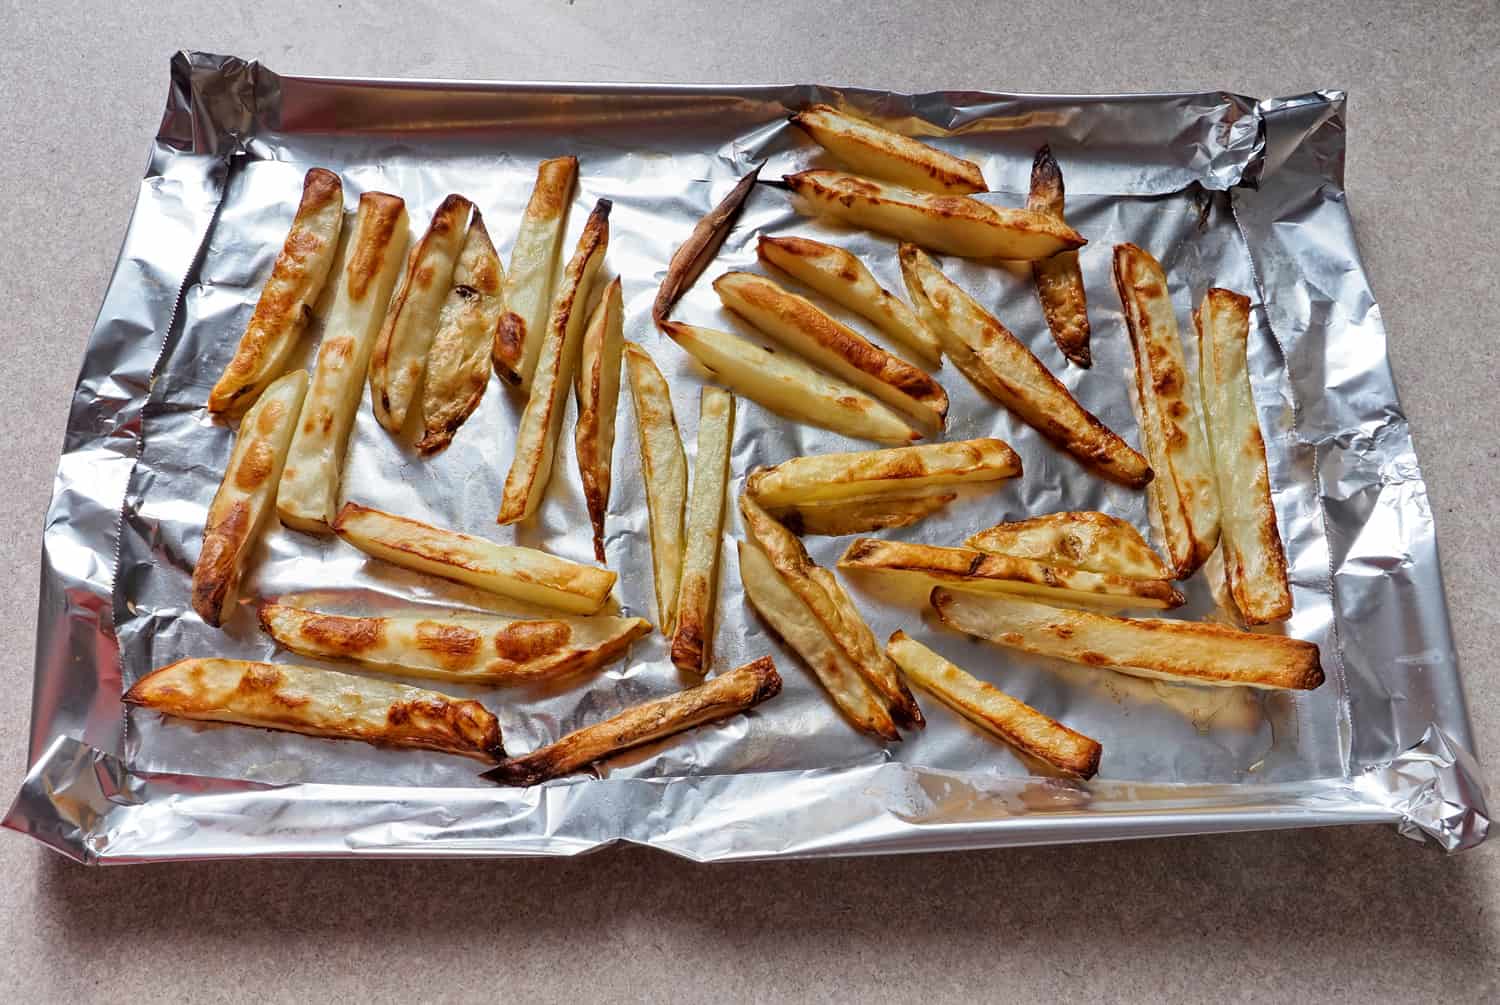 Home prepared baked french fries, in freshly sliced potato and cooked state with olive oil, on a sheet of aluminum foil.